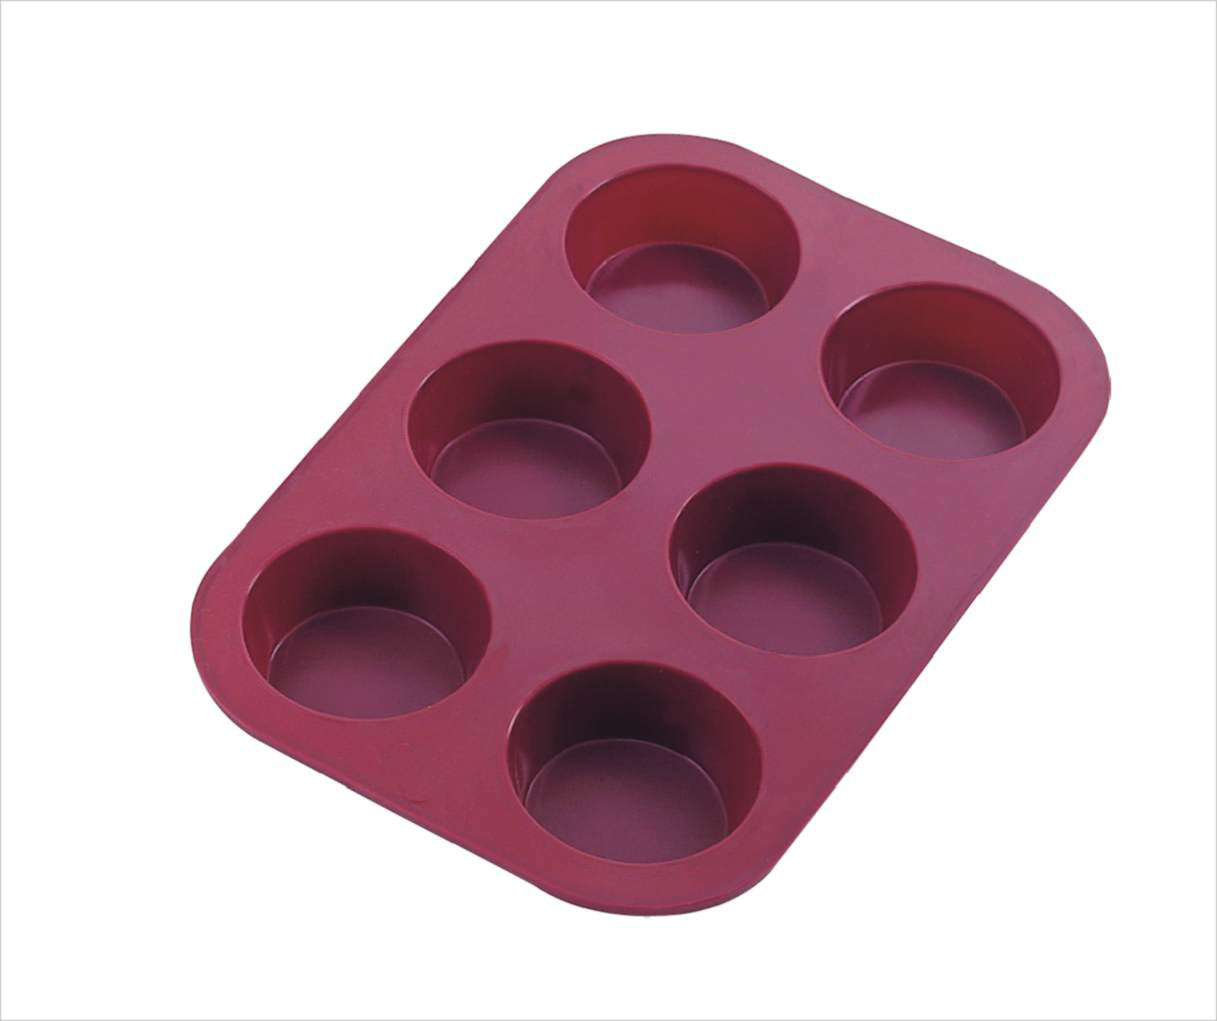  Silicone Bakeware - 6 Cup Muffin Pan ( Silicone Bakeware - 6 Cup Muffin Pan)